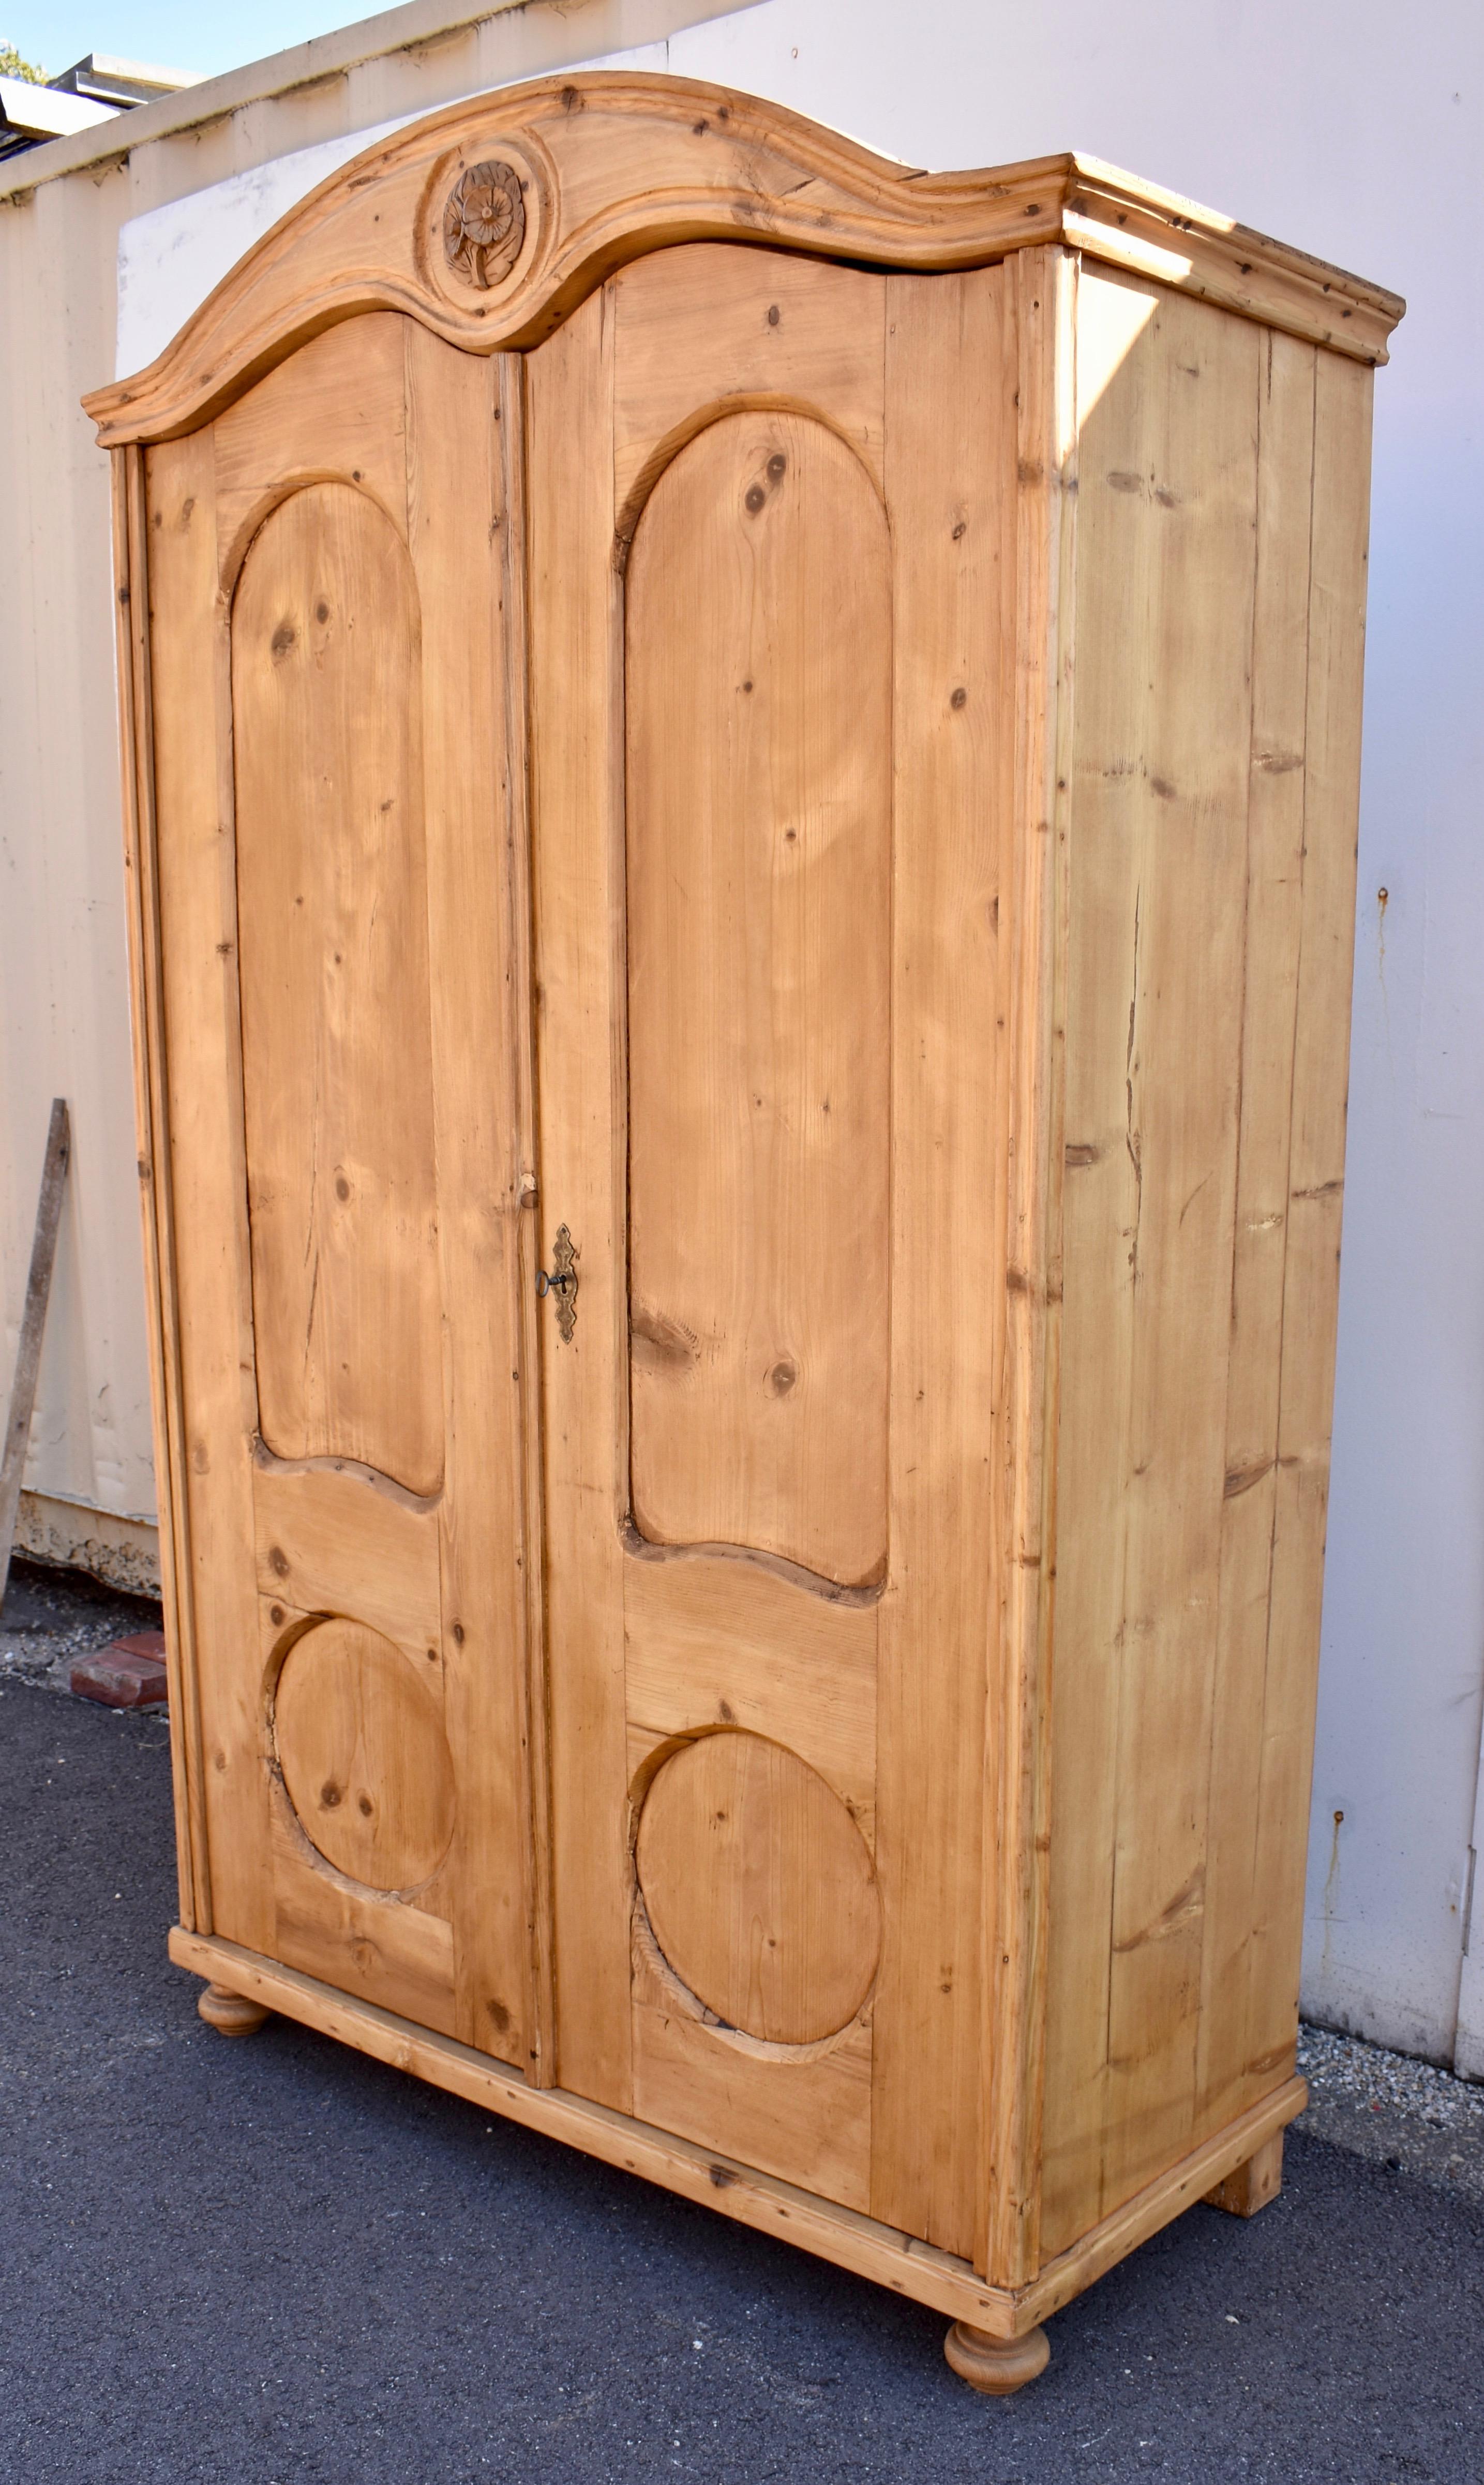 Hungarian Pine Bonnet-Top Armoire with Two Doors and One Drawer